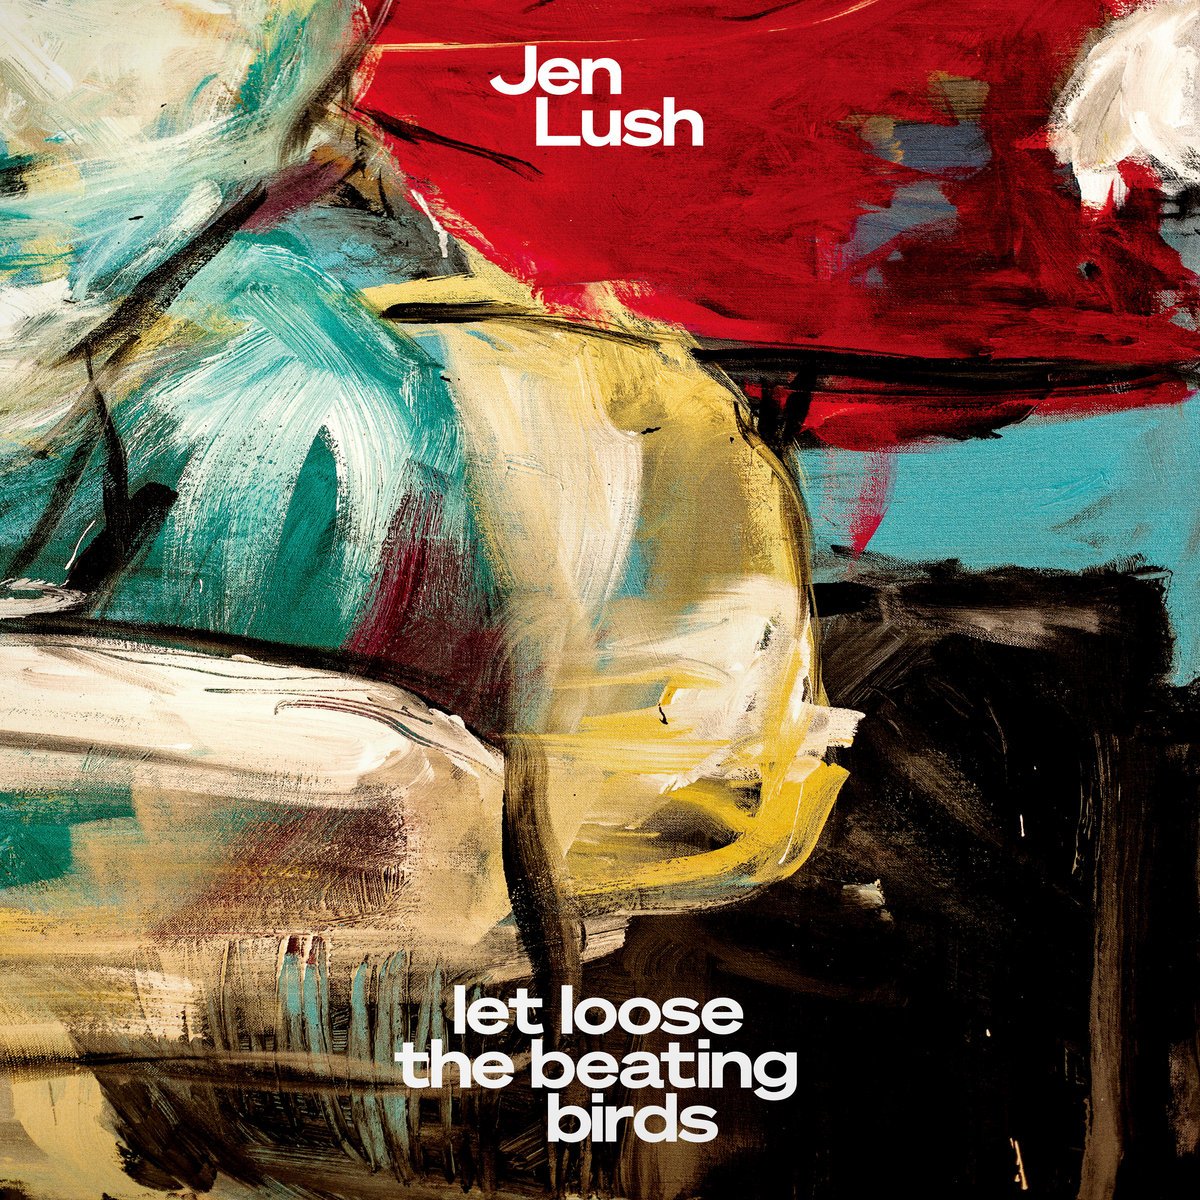 Jen Lush - "Let Loose the Beating Birds" [Recorded & Mixed (JB)]